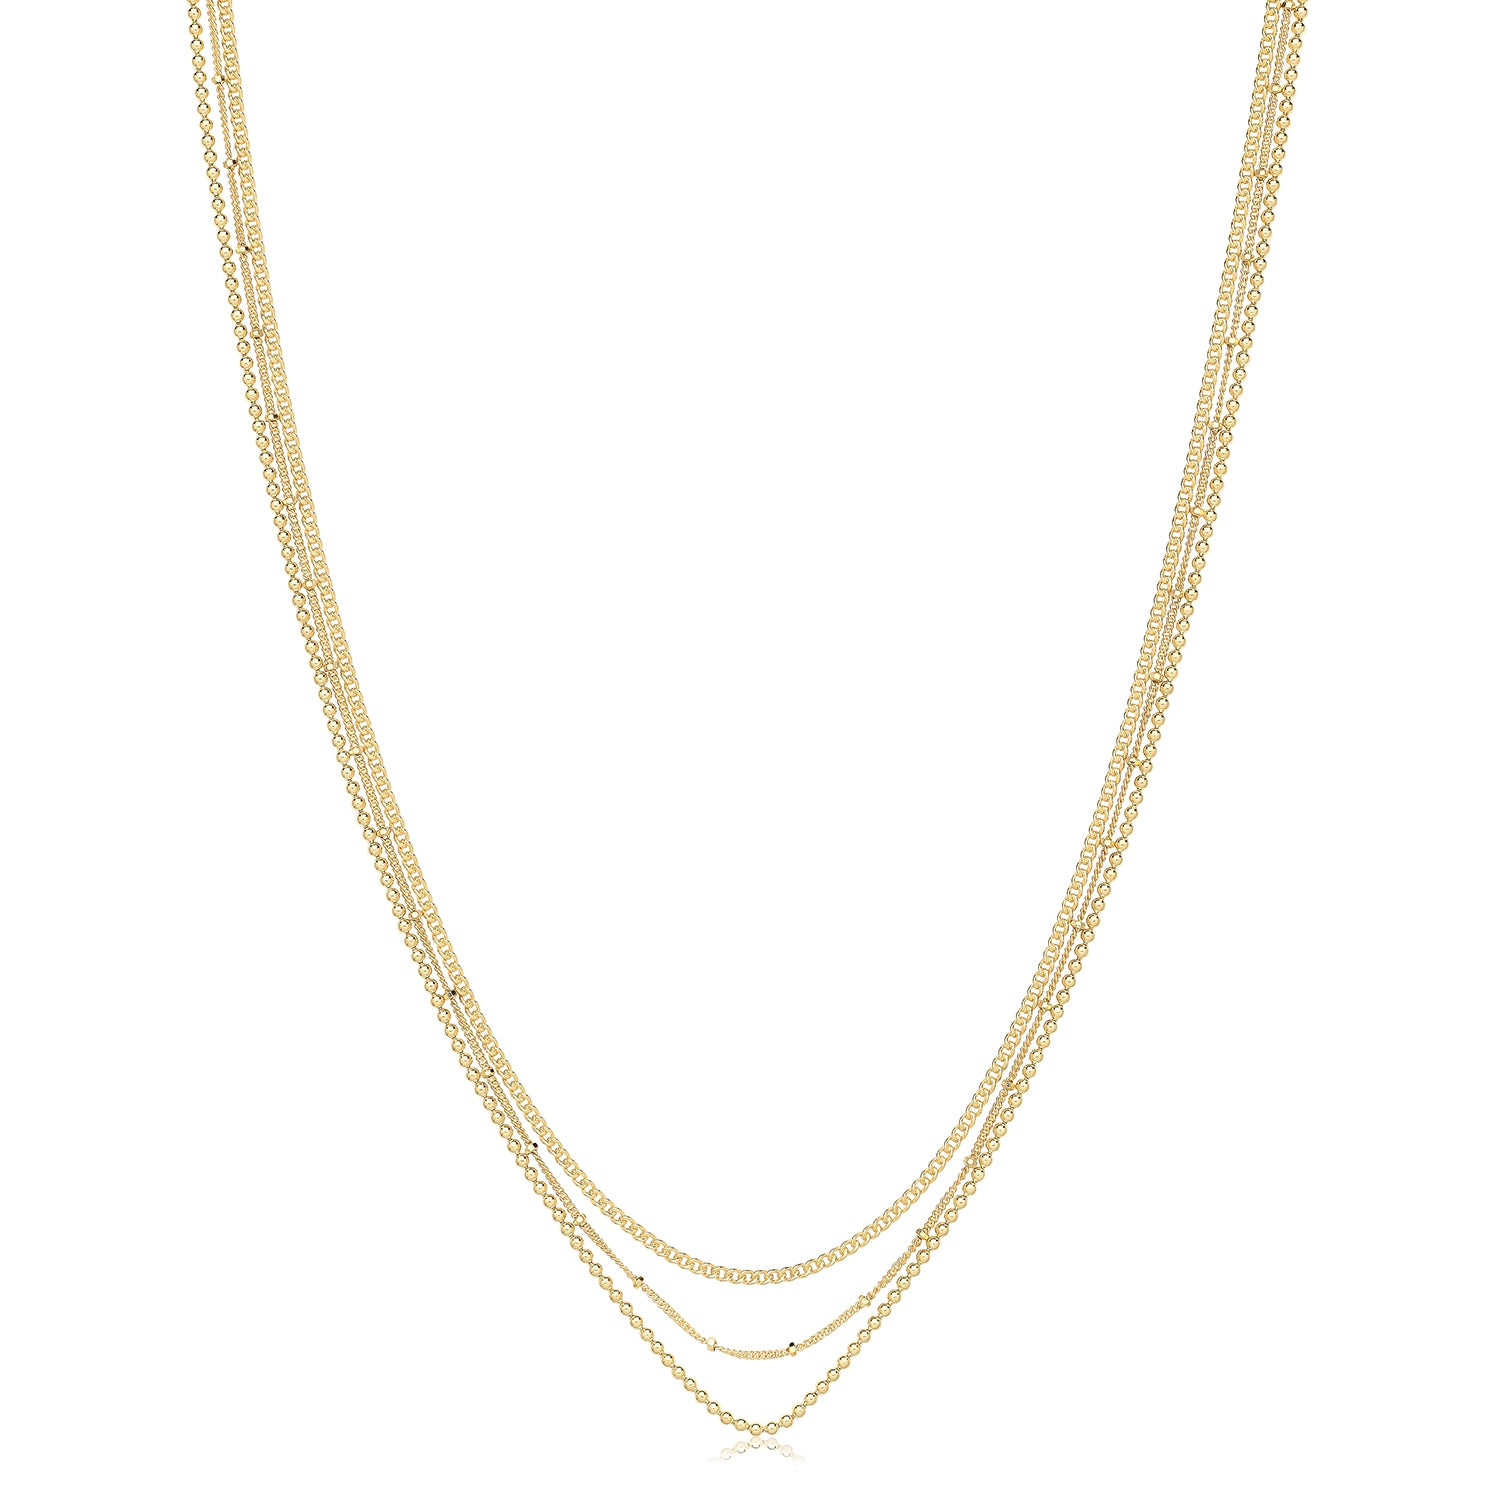 SILVER YELLOW GOLD PLATED MULTICHAIN NECKLET